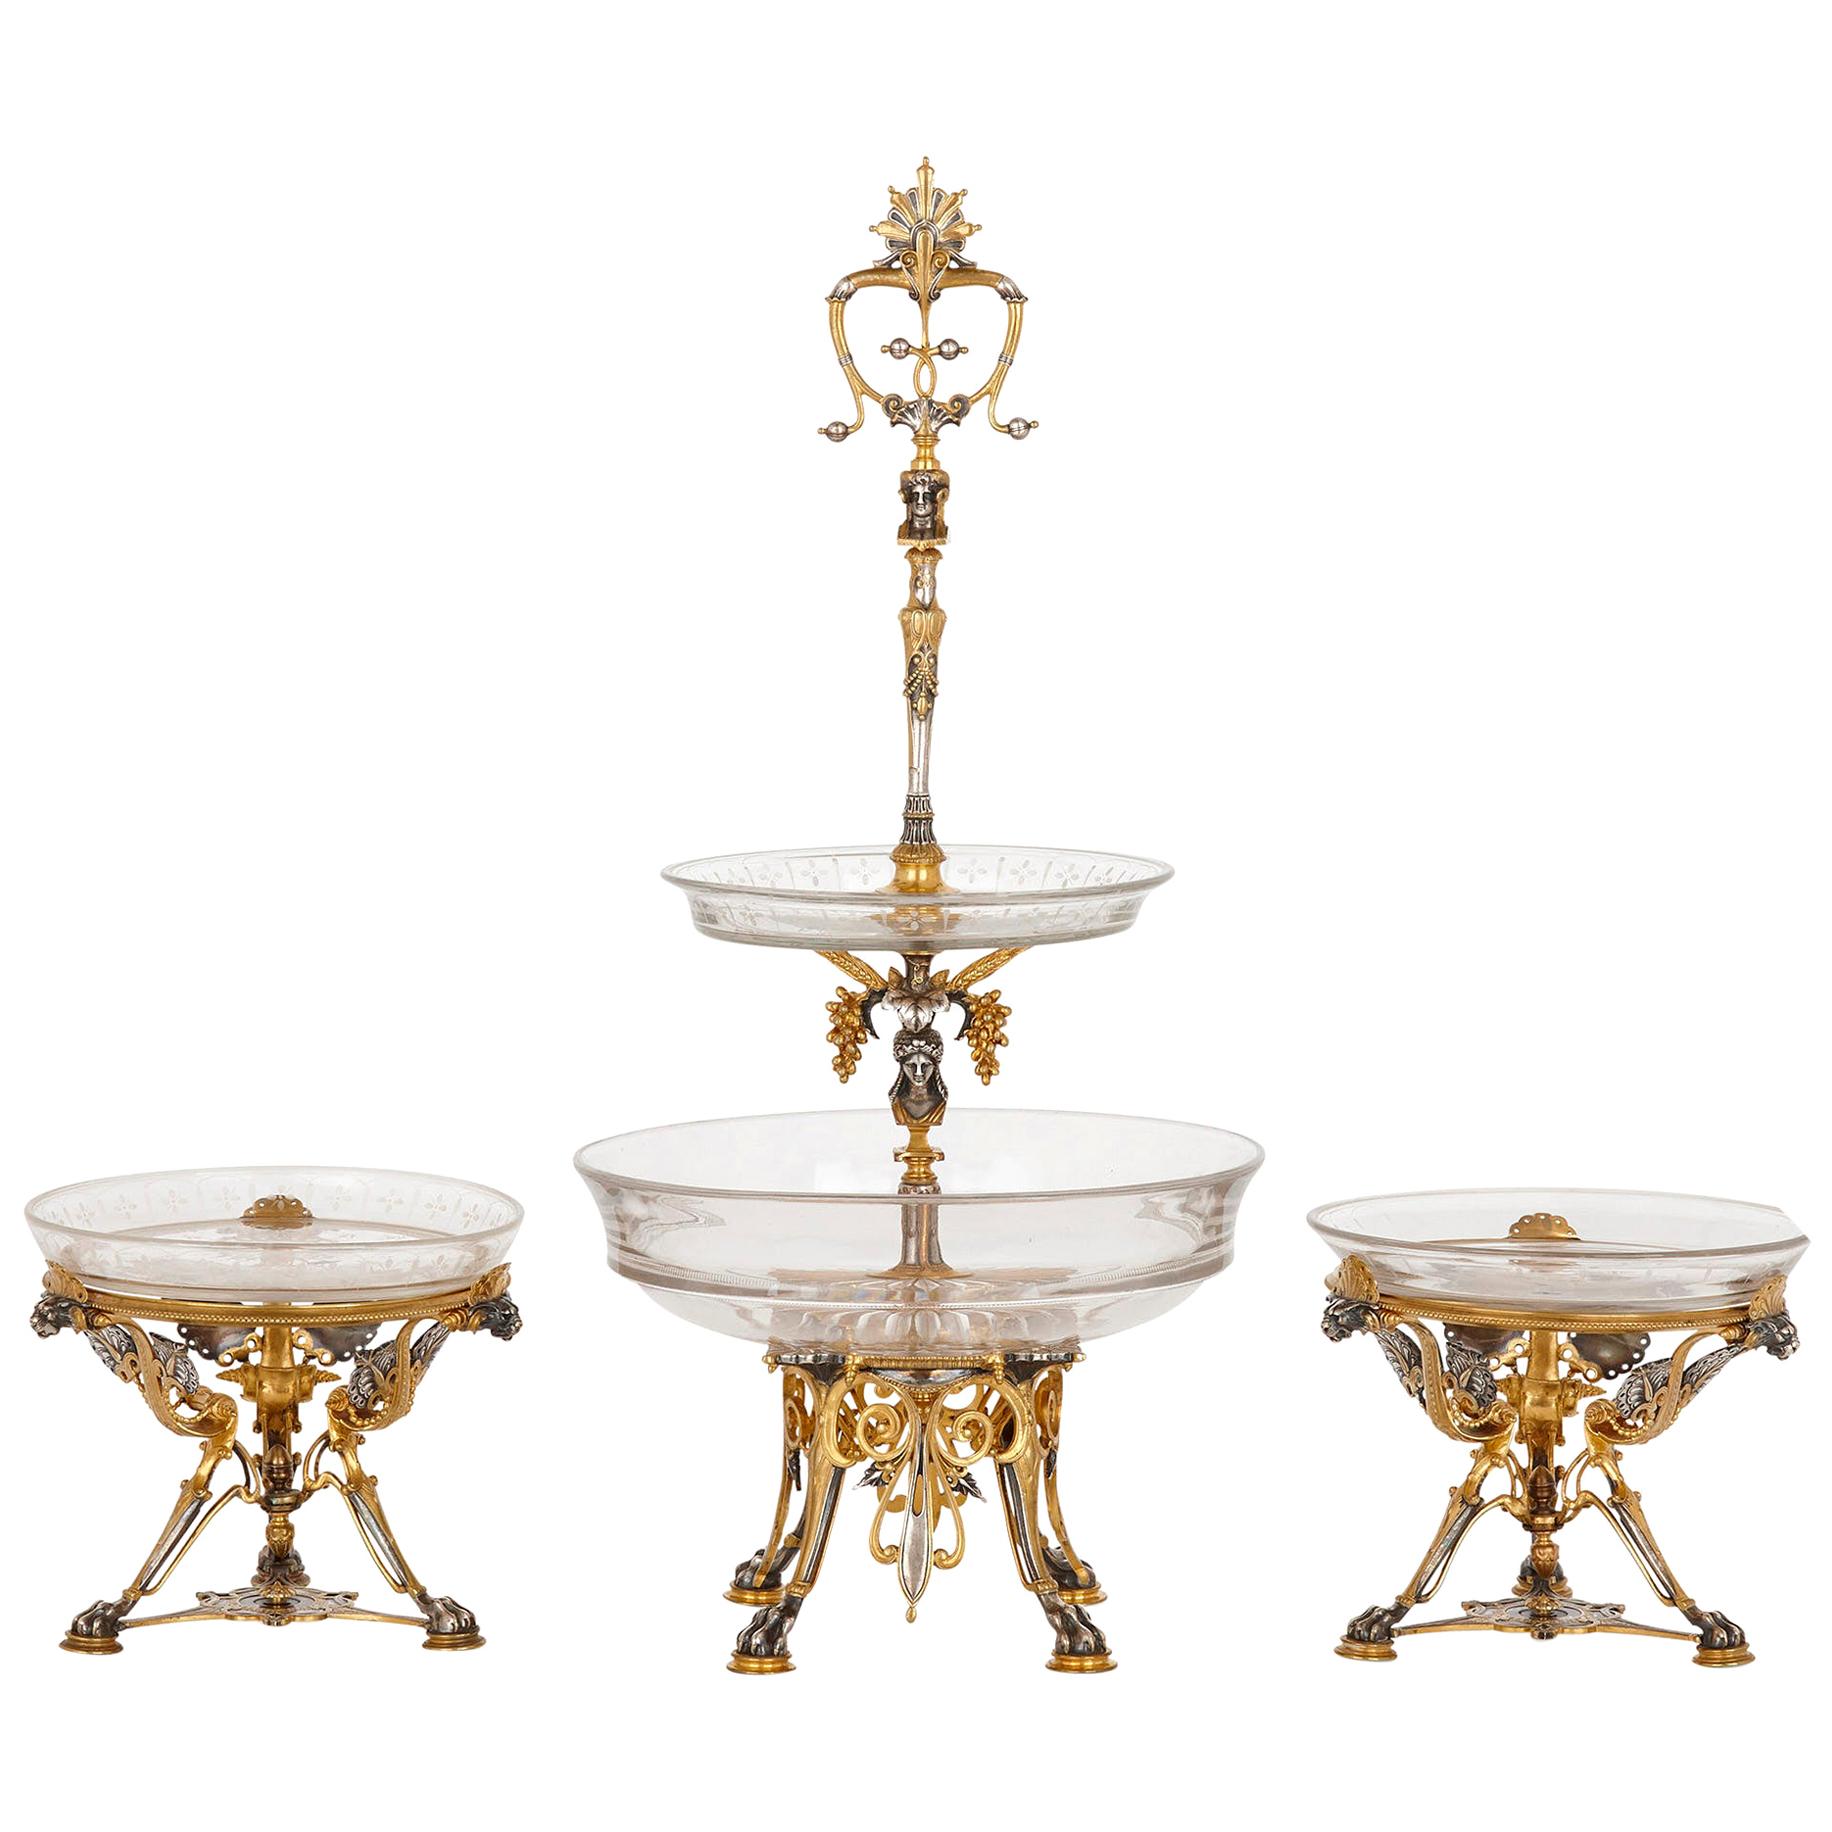 Napoleon III Period Silvered and Gilt Bronze Centerpiece Garniture by Picard